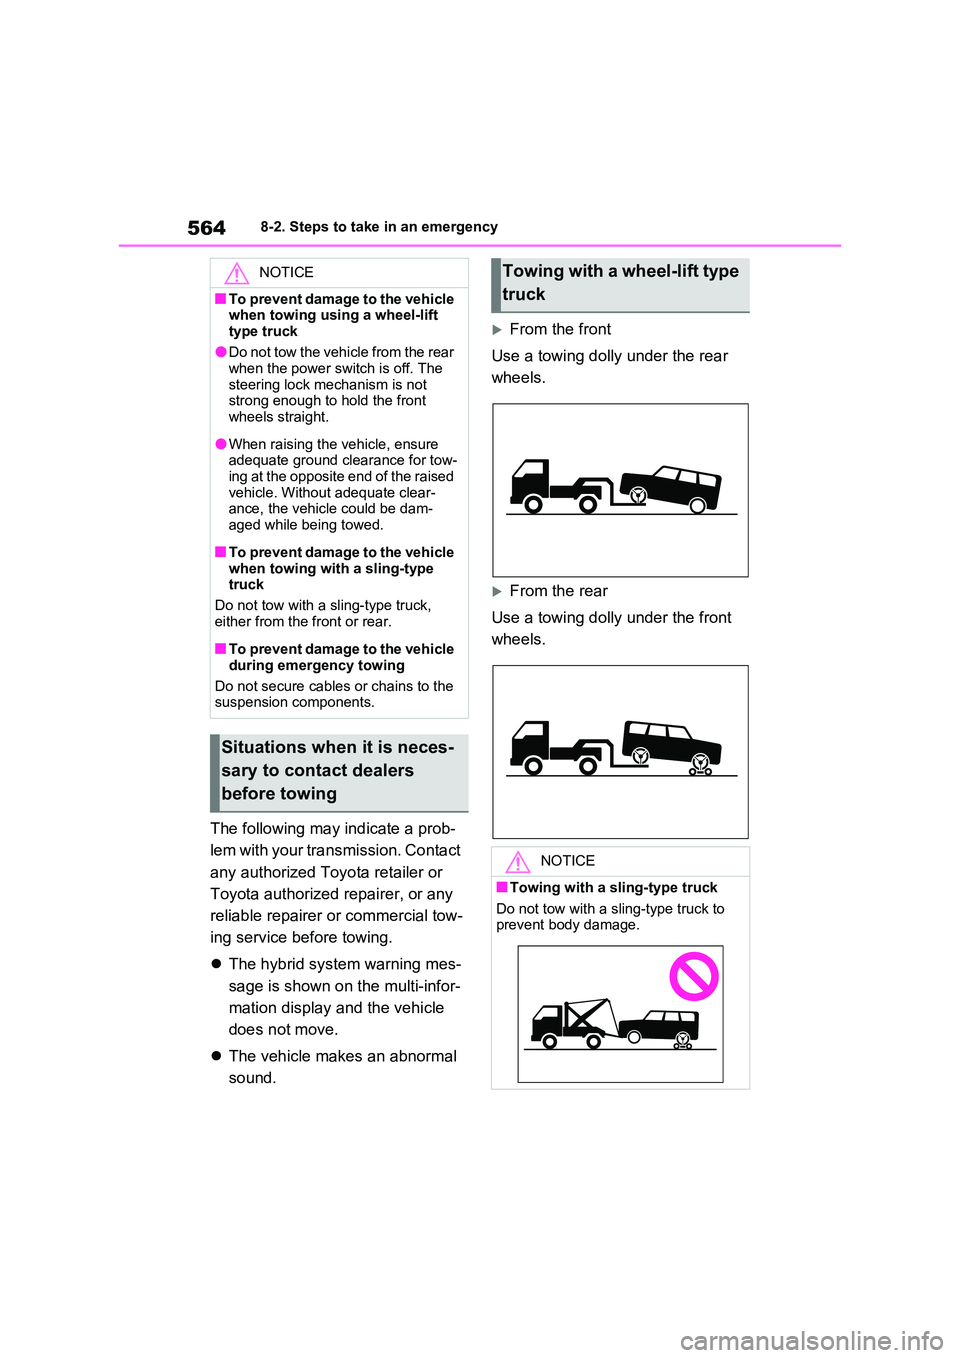 TOYOTA VERSO S 2011  Owners Manual 5648-2. Steps to take in an emergency
The following may indicate a prob- 
lem with your transmission. Contact  
any authorized Toyota retailer or  
Toyota authorized repairer, or any  
reliable repair